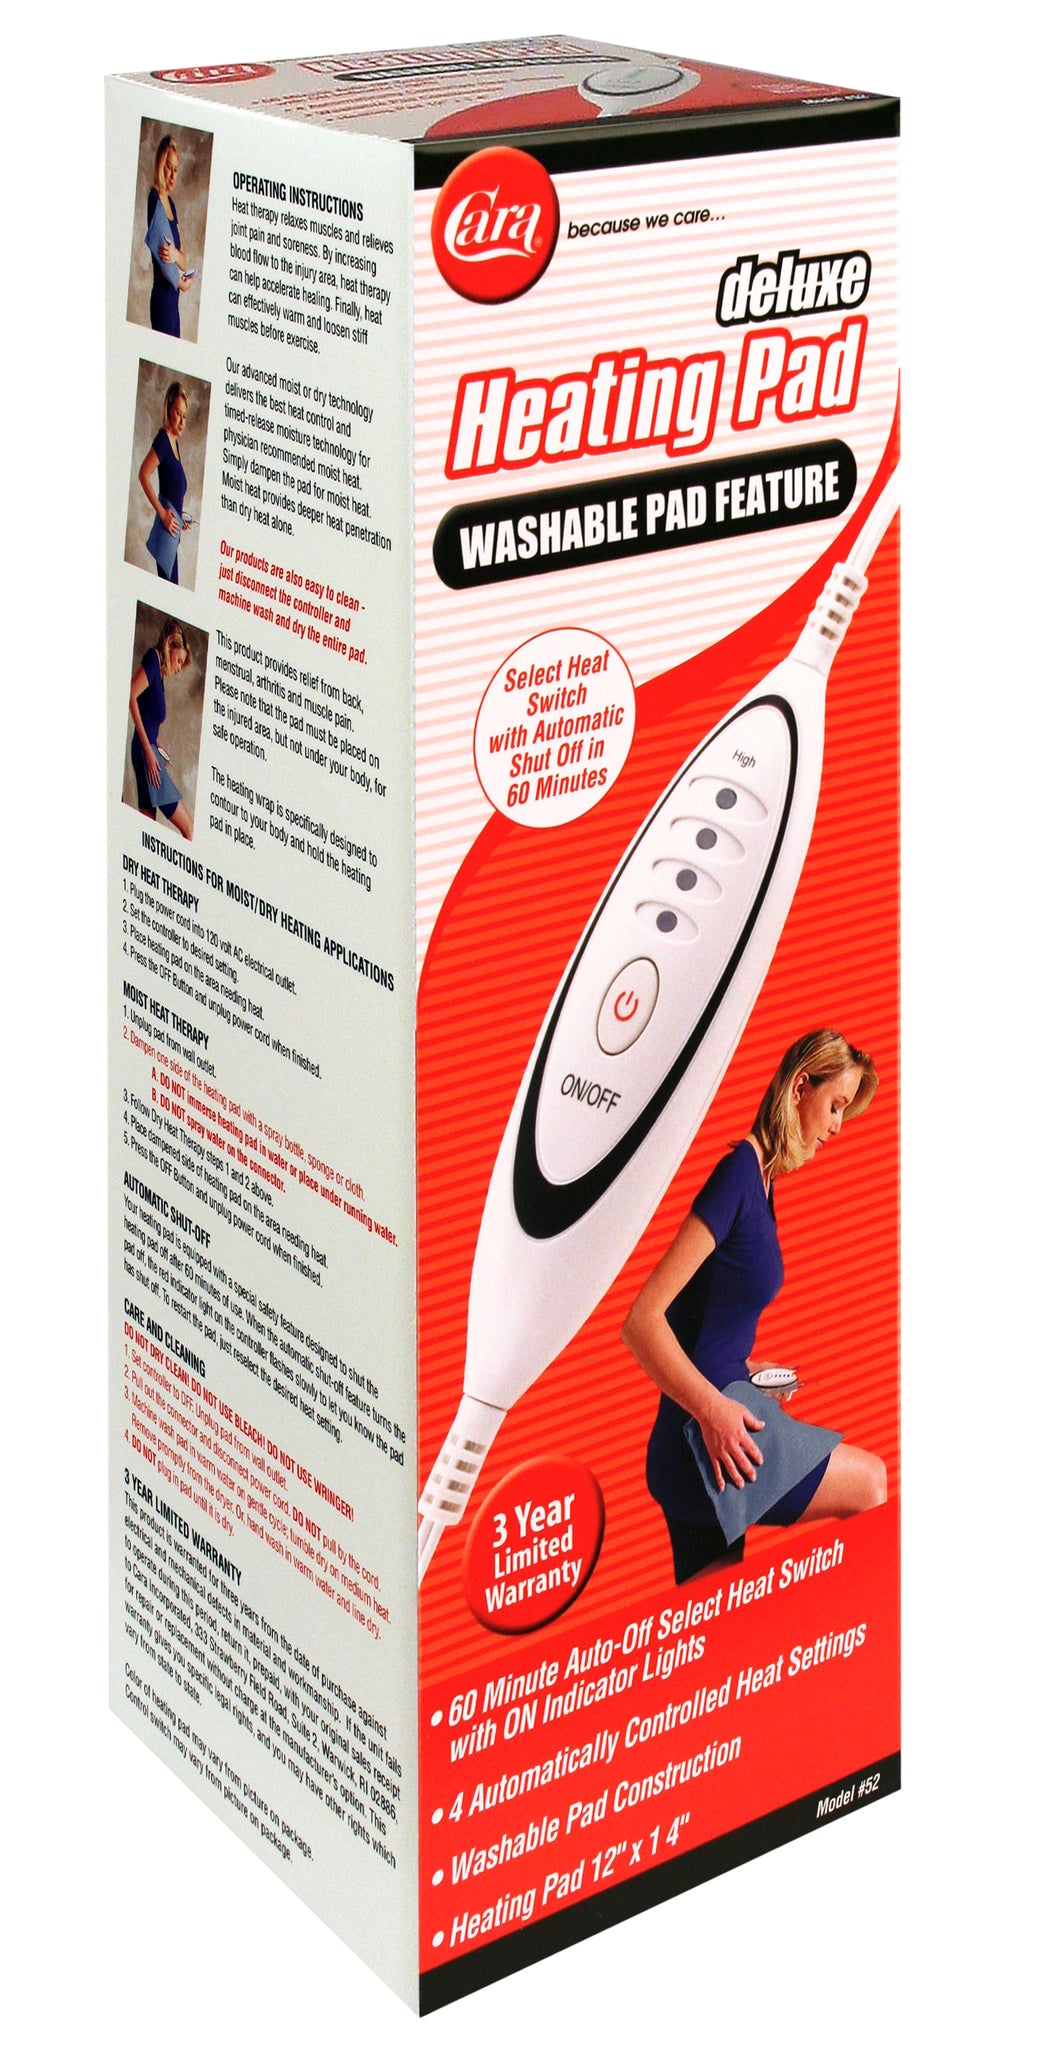 Model #52 Deluxe Moist/Dry Heating Pad Washable